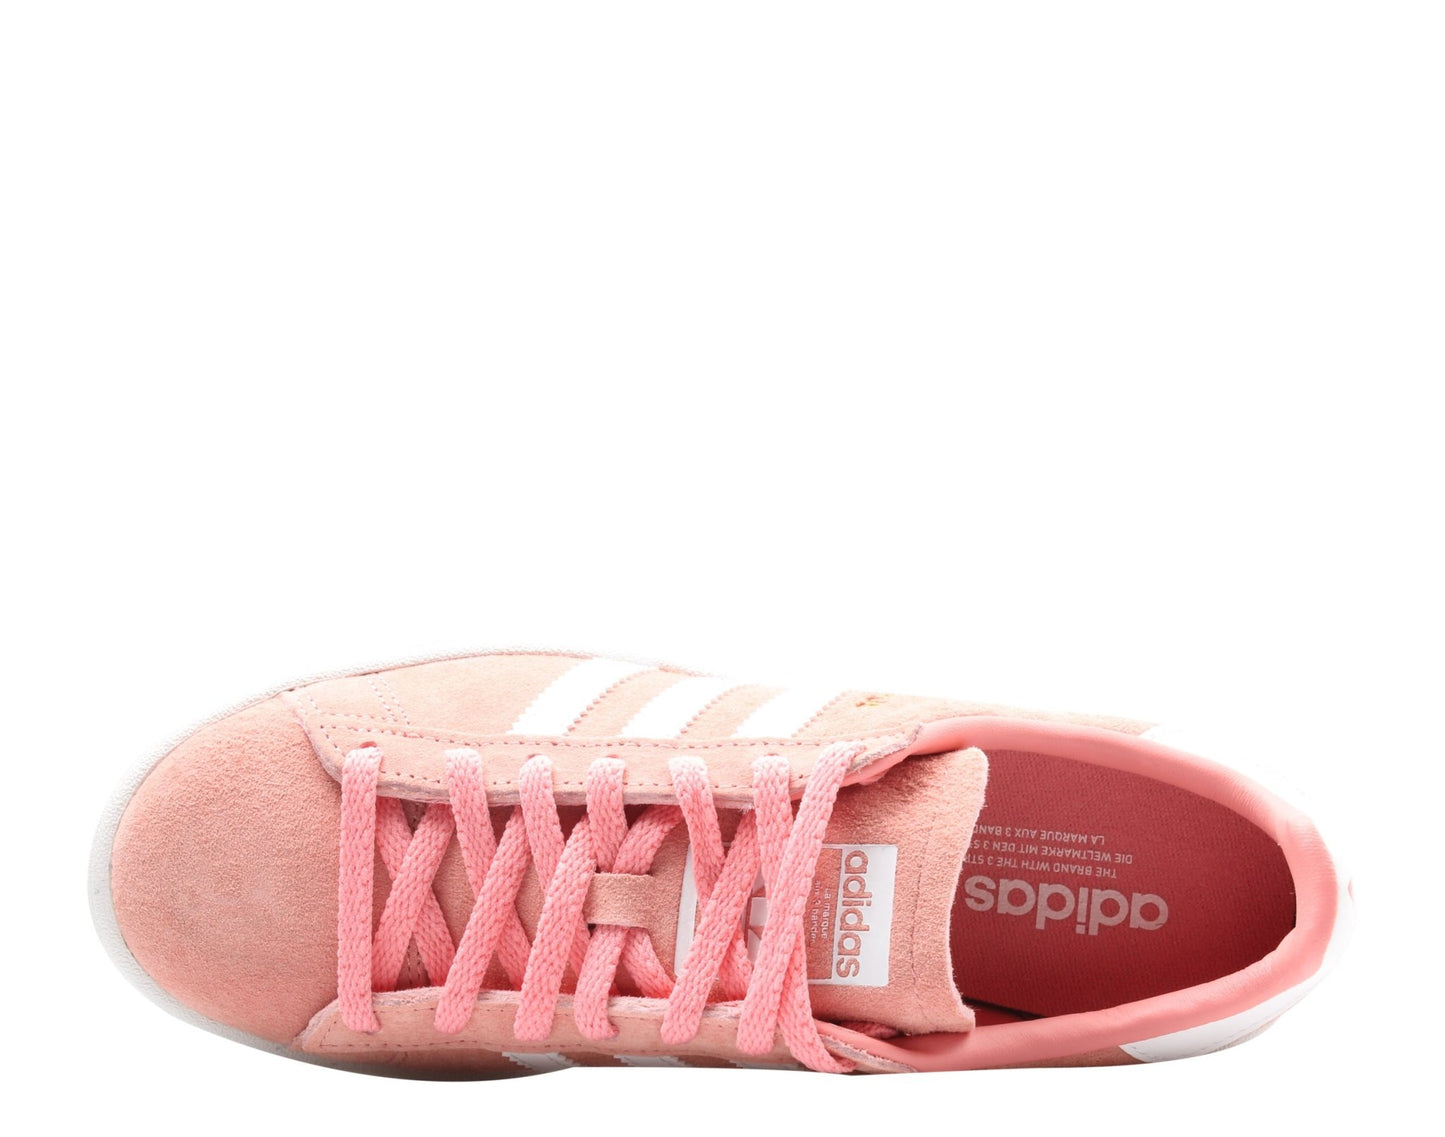 Adidas Originals Campus Pink Tactile Rose/White Women's Casual Shoes B41939 - Becauze